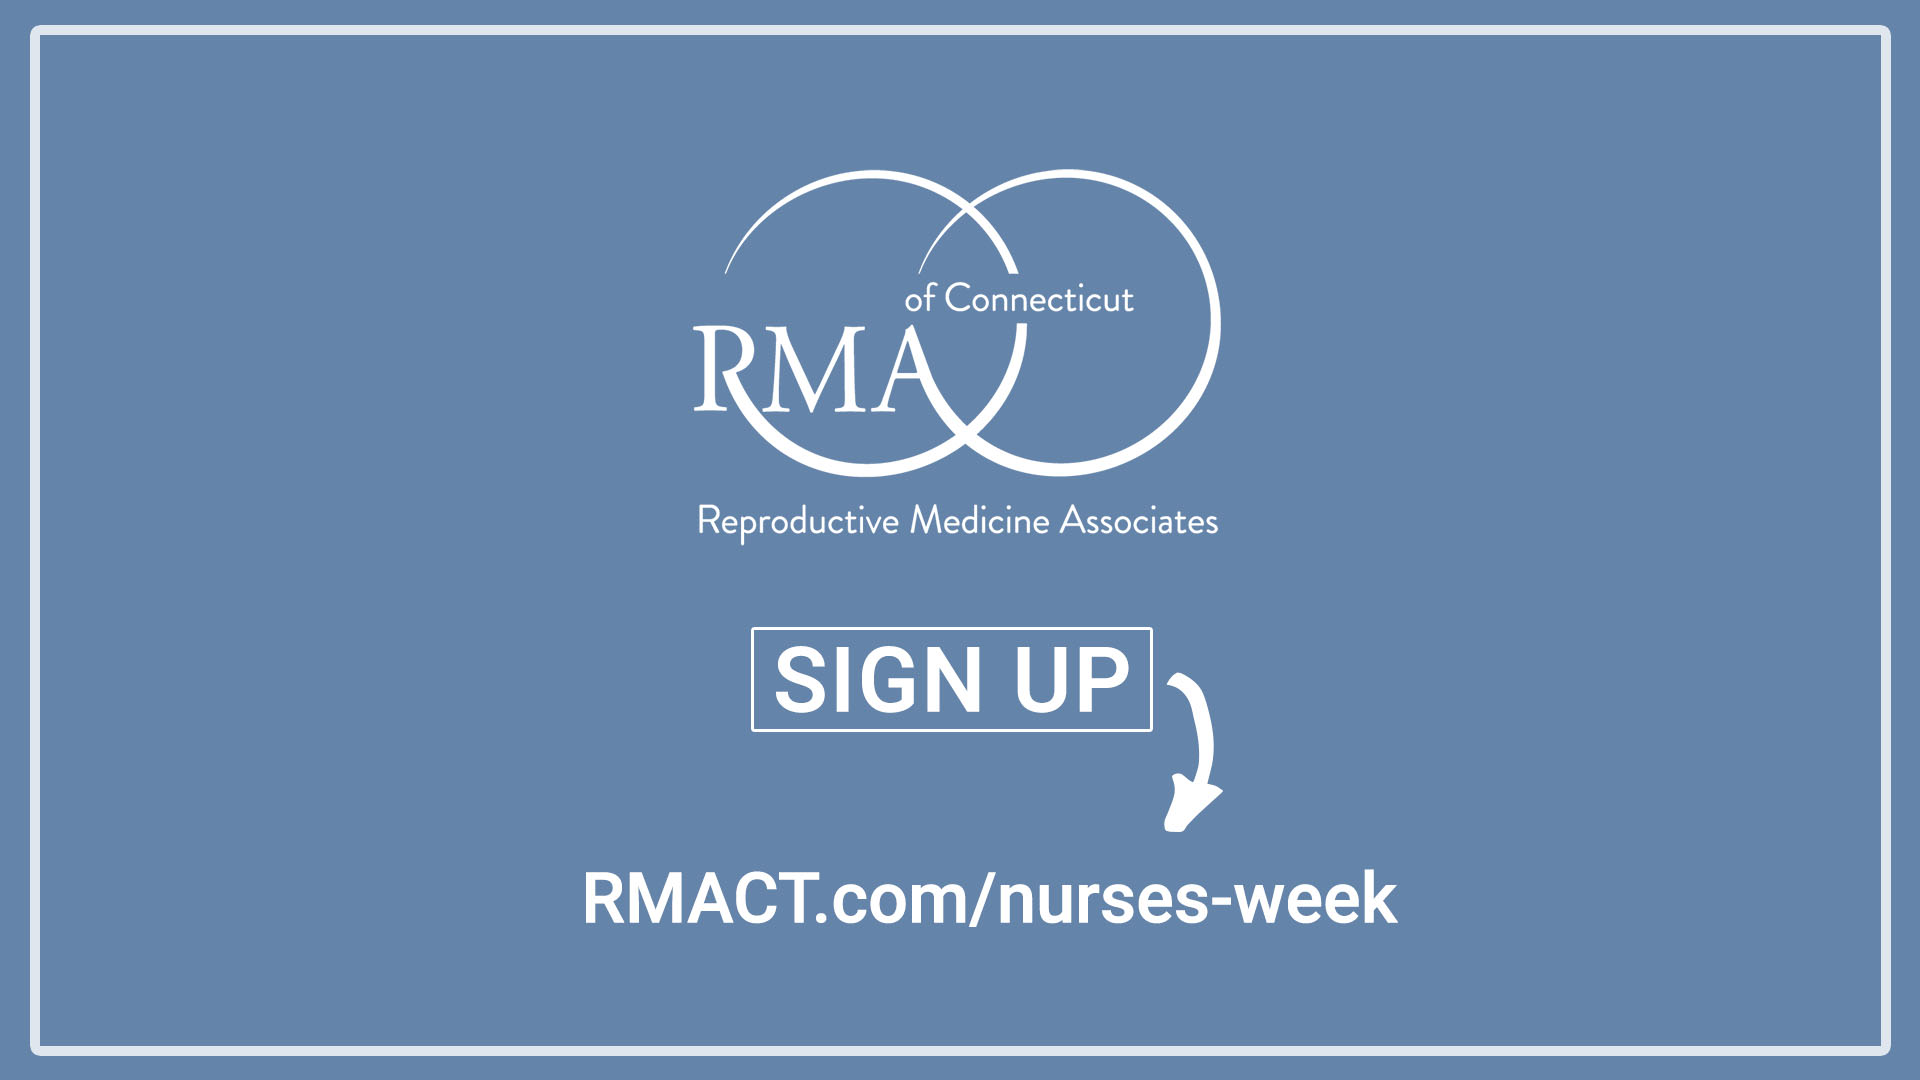 Top CT & NY Fertility Clinic RMA of Connecticut Offers Free AMH Fertility Testing to Female Nurses for National Nurses Week